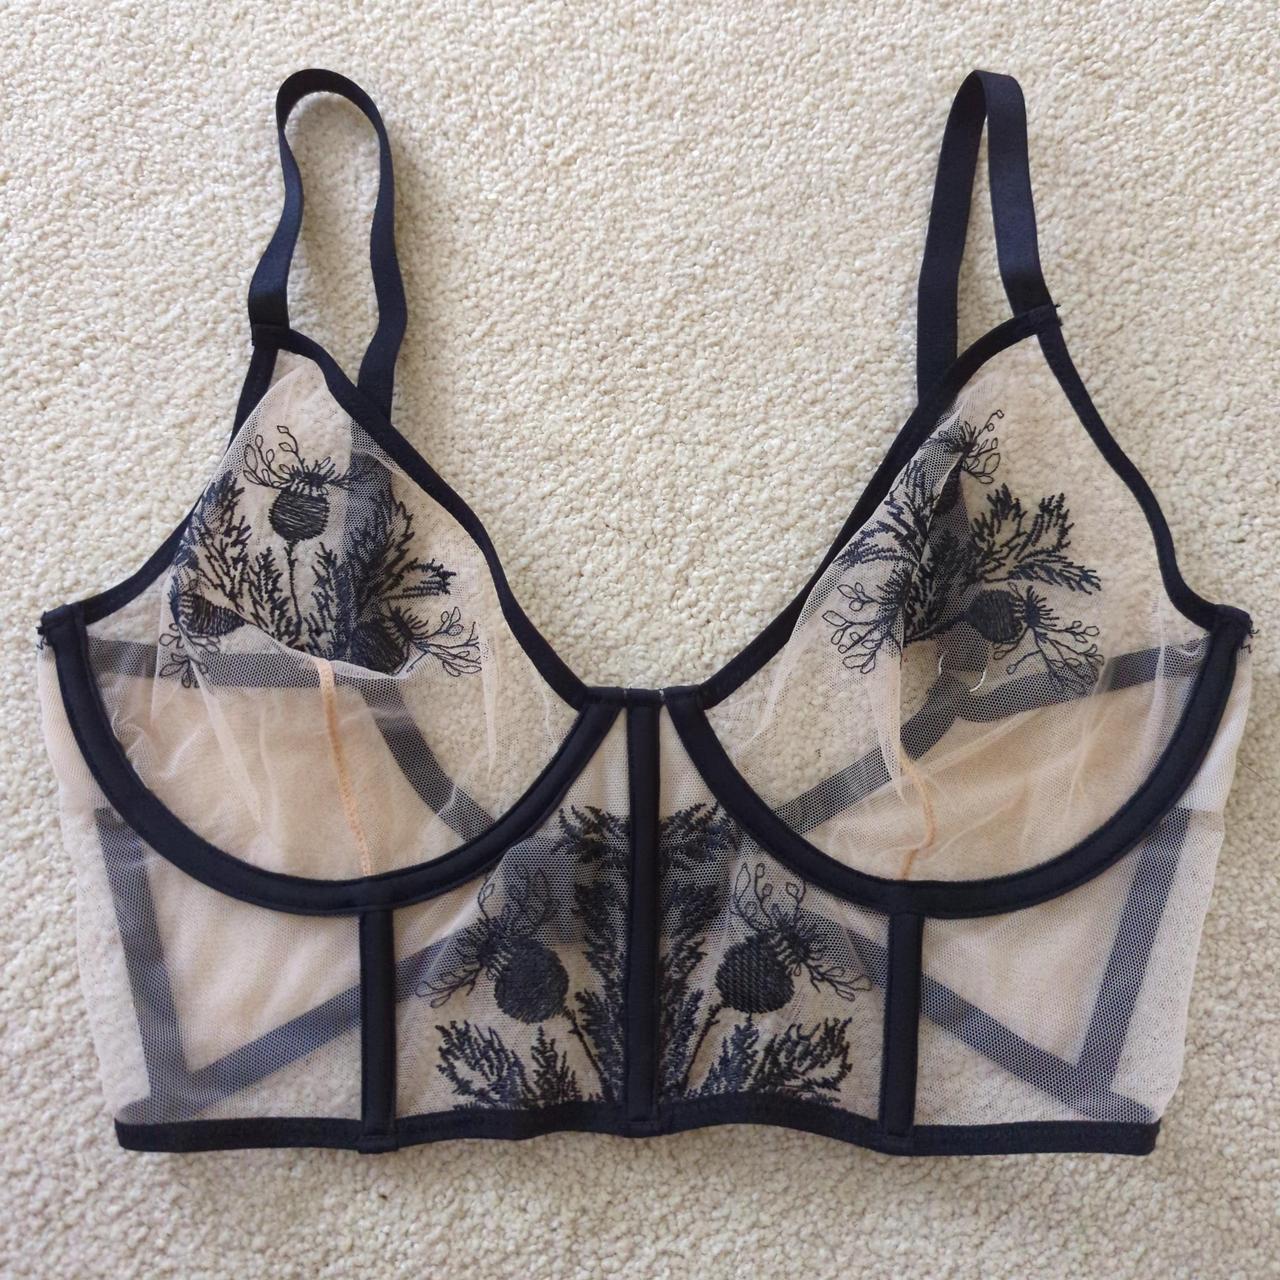 THISTLE AND SPIRE Women's Black and Tan Bra